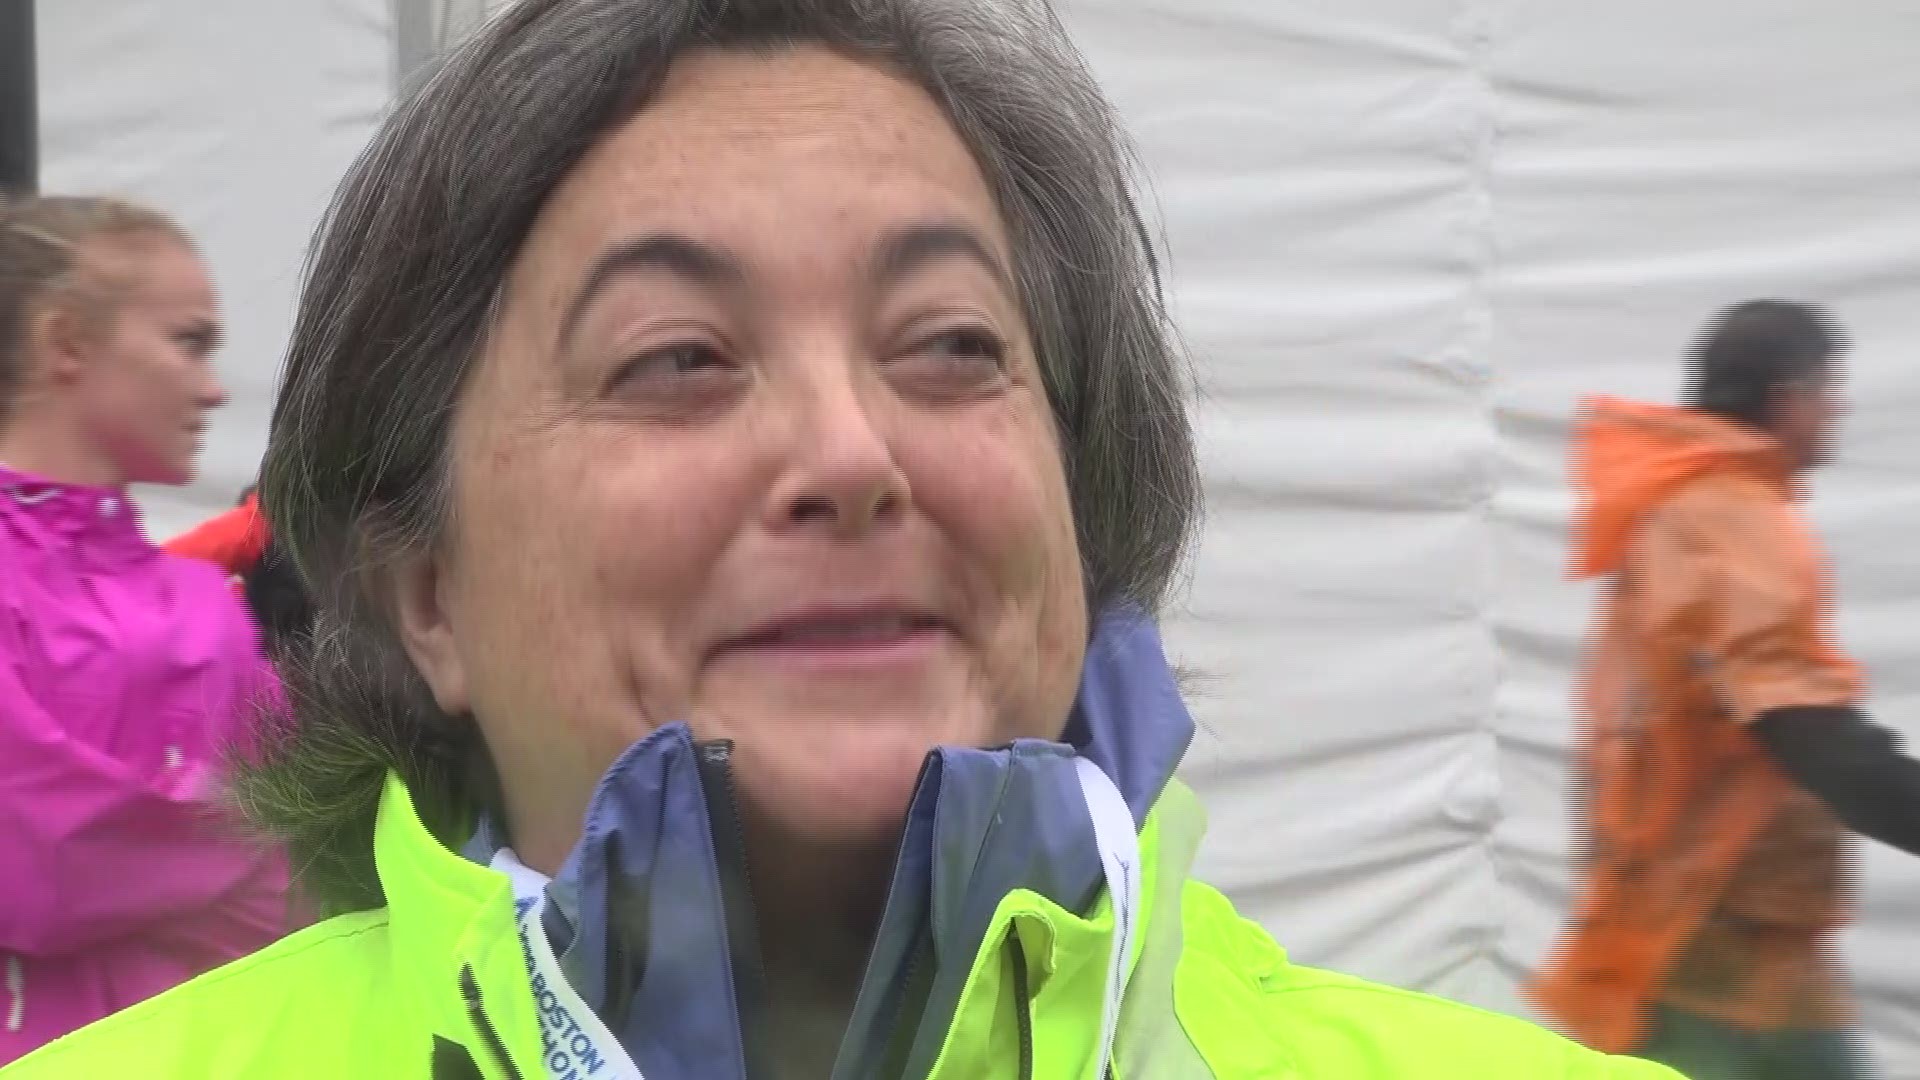 Go Joanie!
Mainers cheer on Joan Benoit as she runs the Boston Marathon today 40 years after record-breaking win.